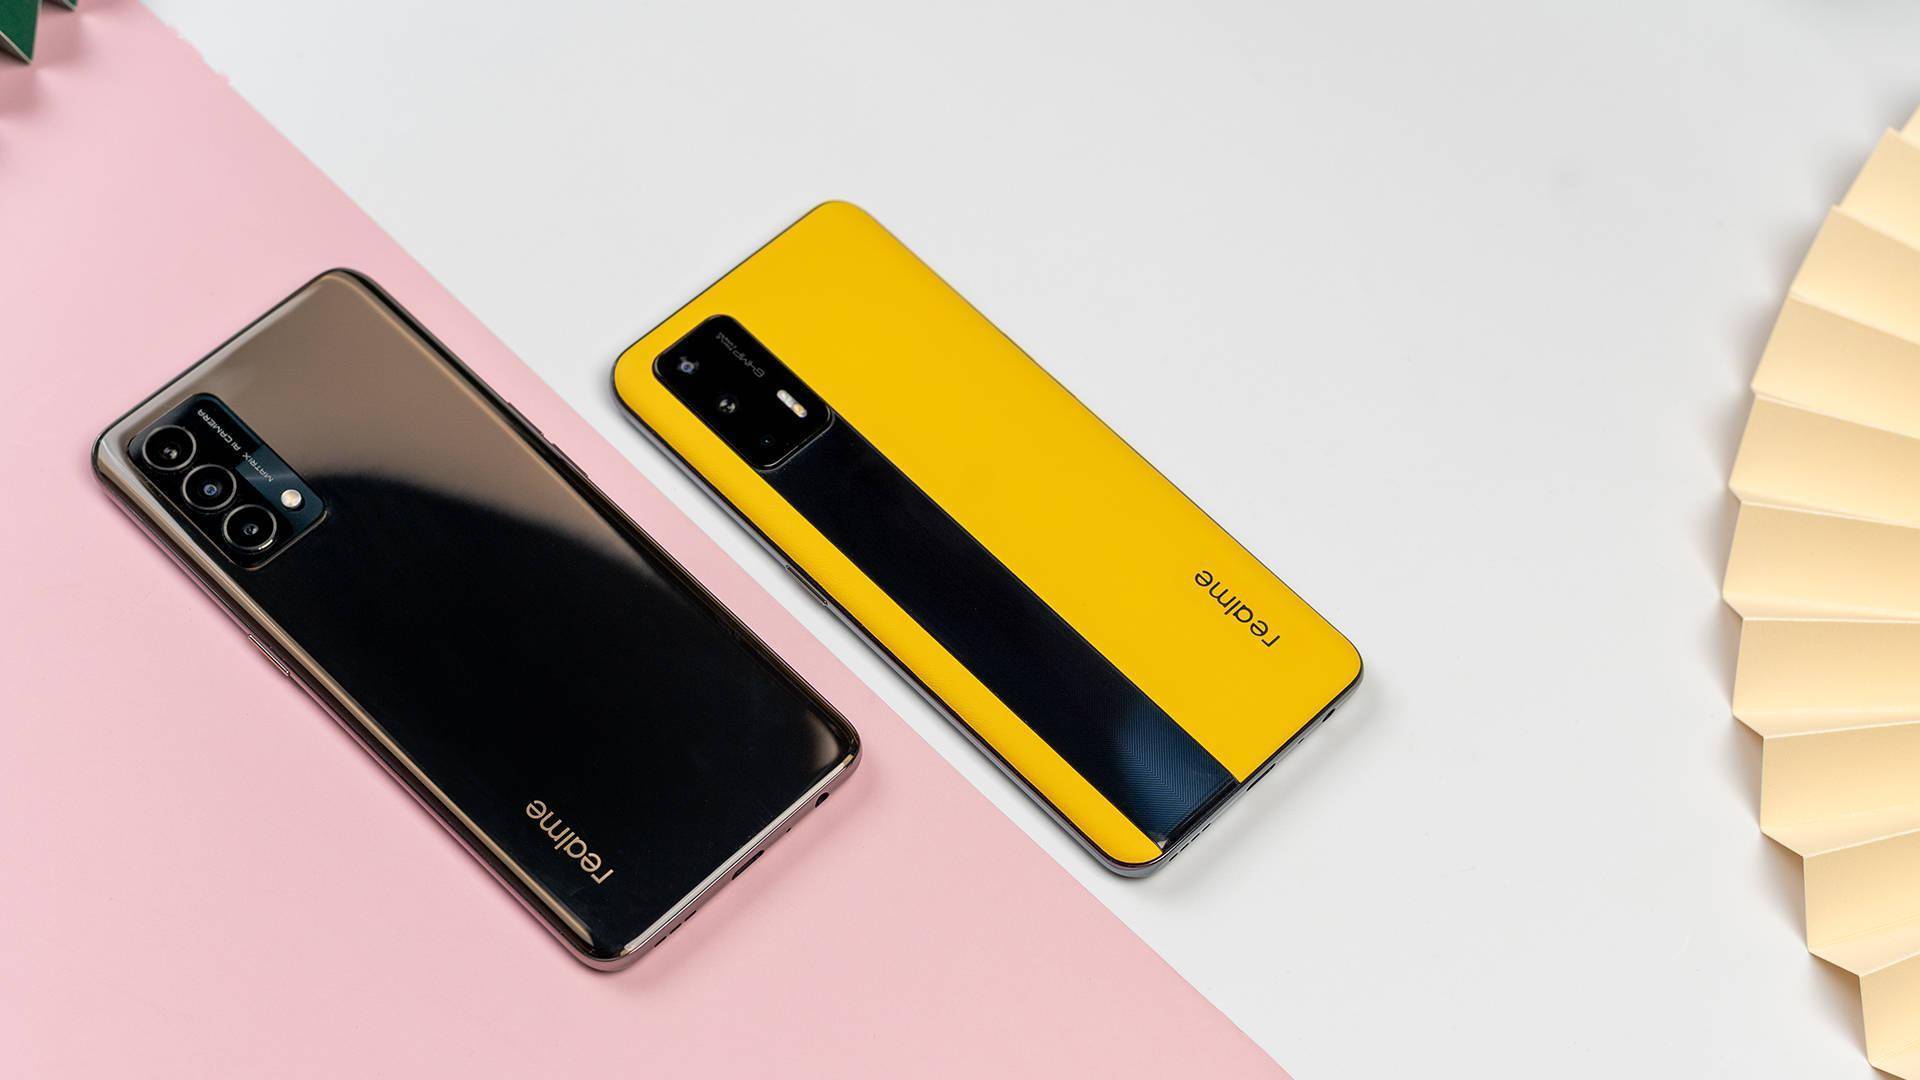 The Realme 9 series will consist of four smartphones that will hit the market in February 2022